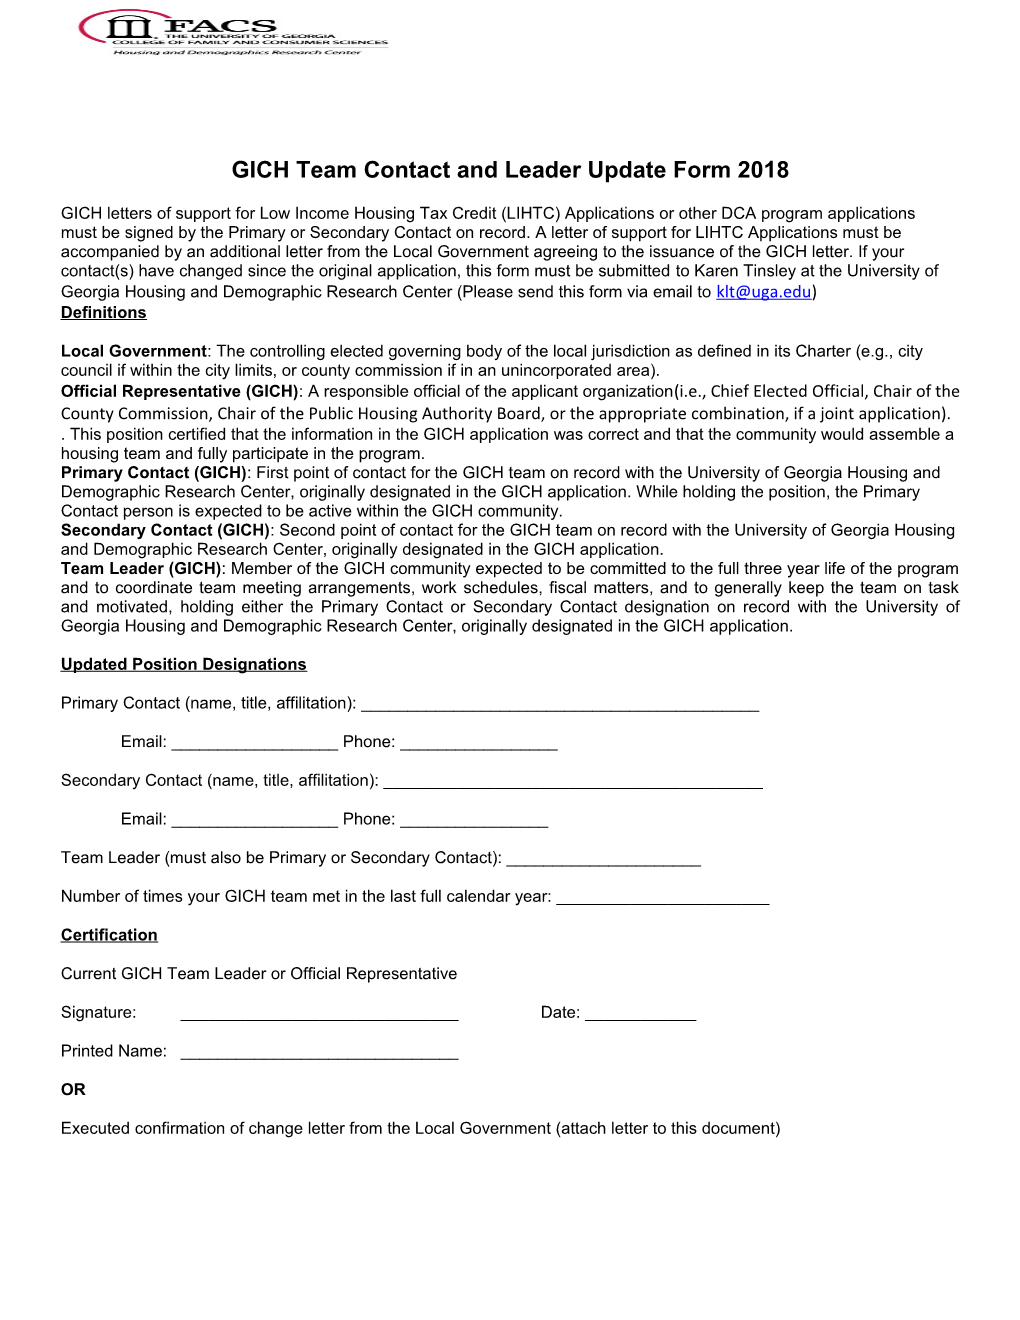 GICH Team Contact and Leader Update Form 2018